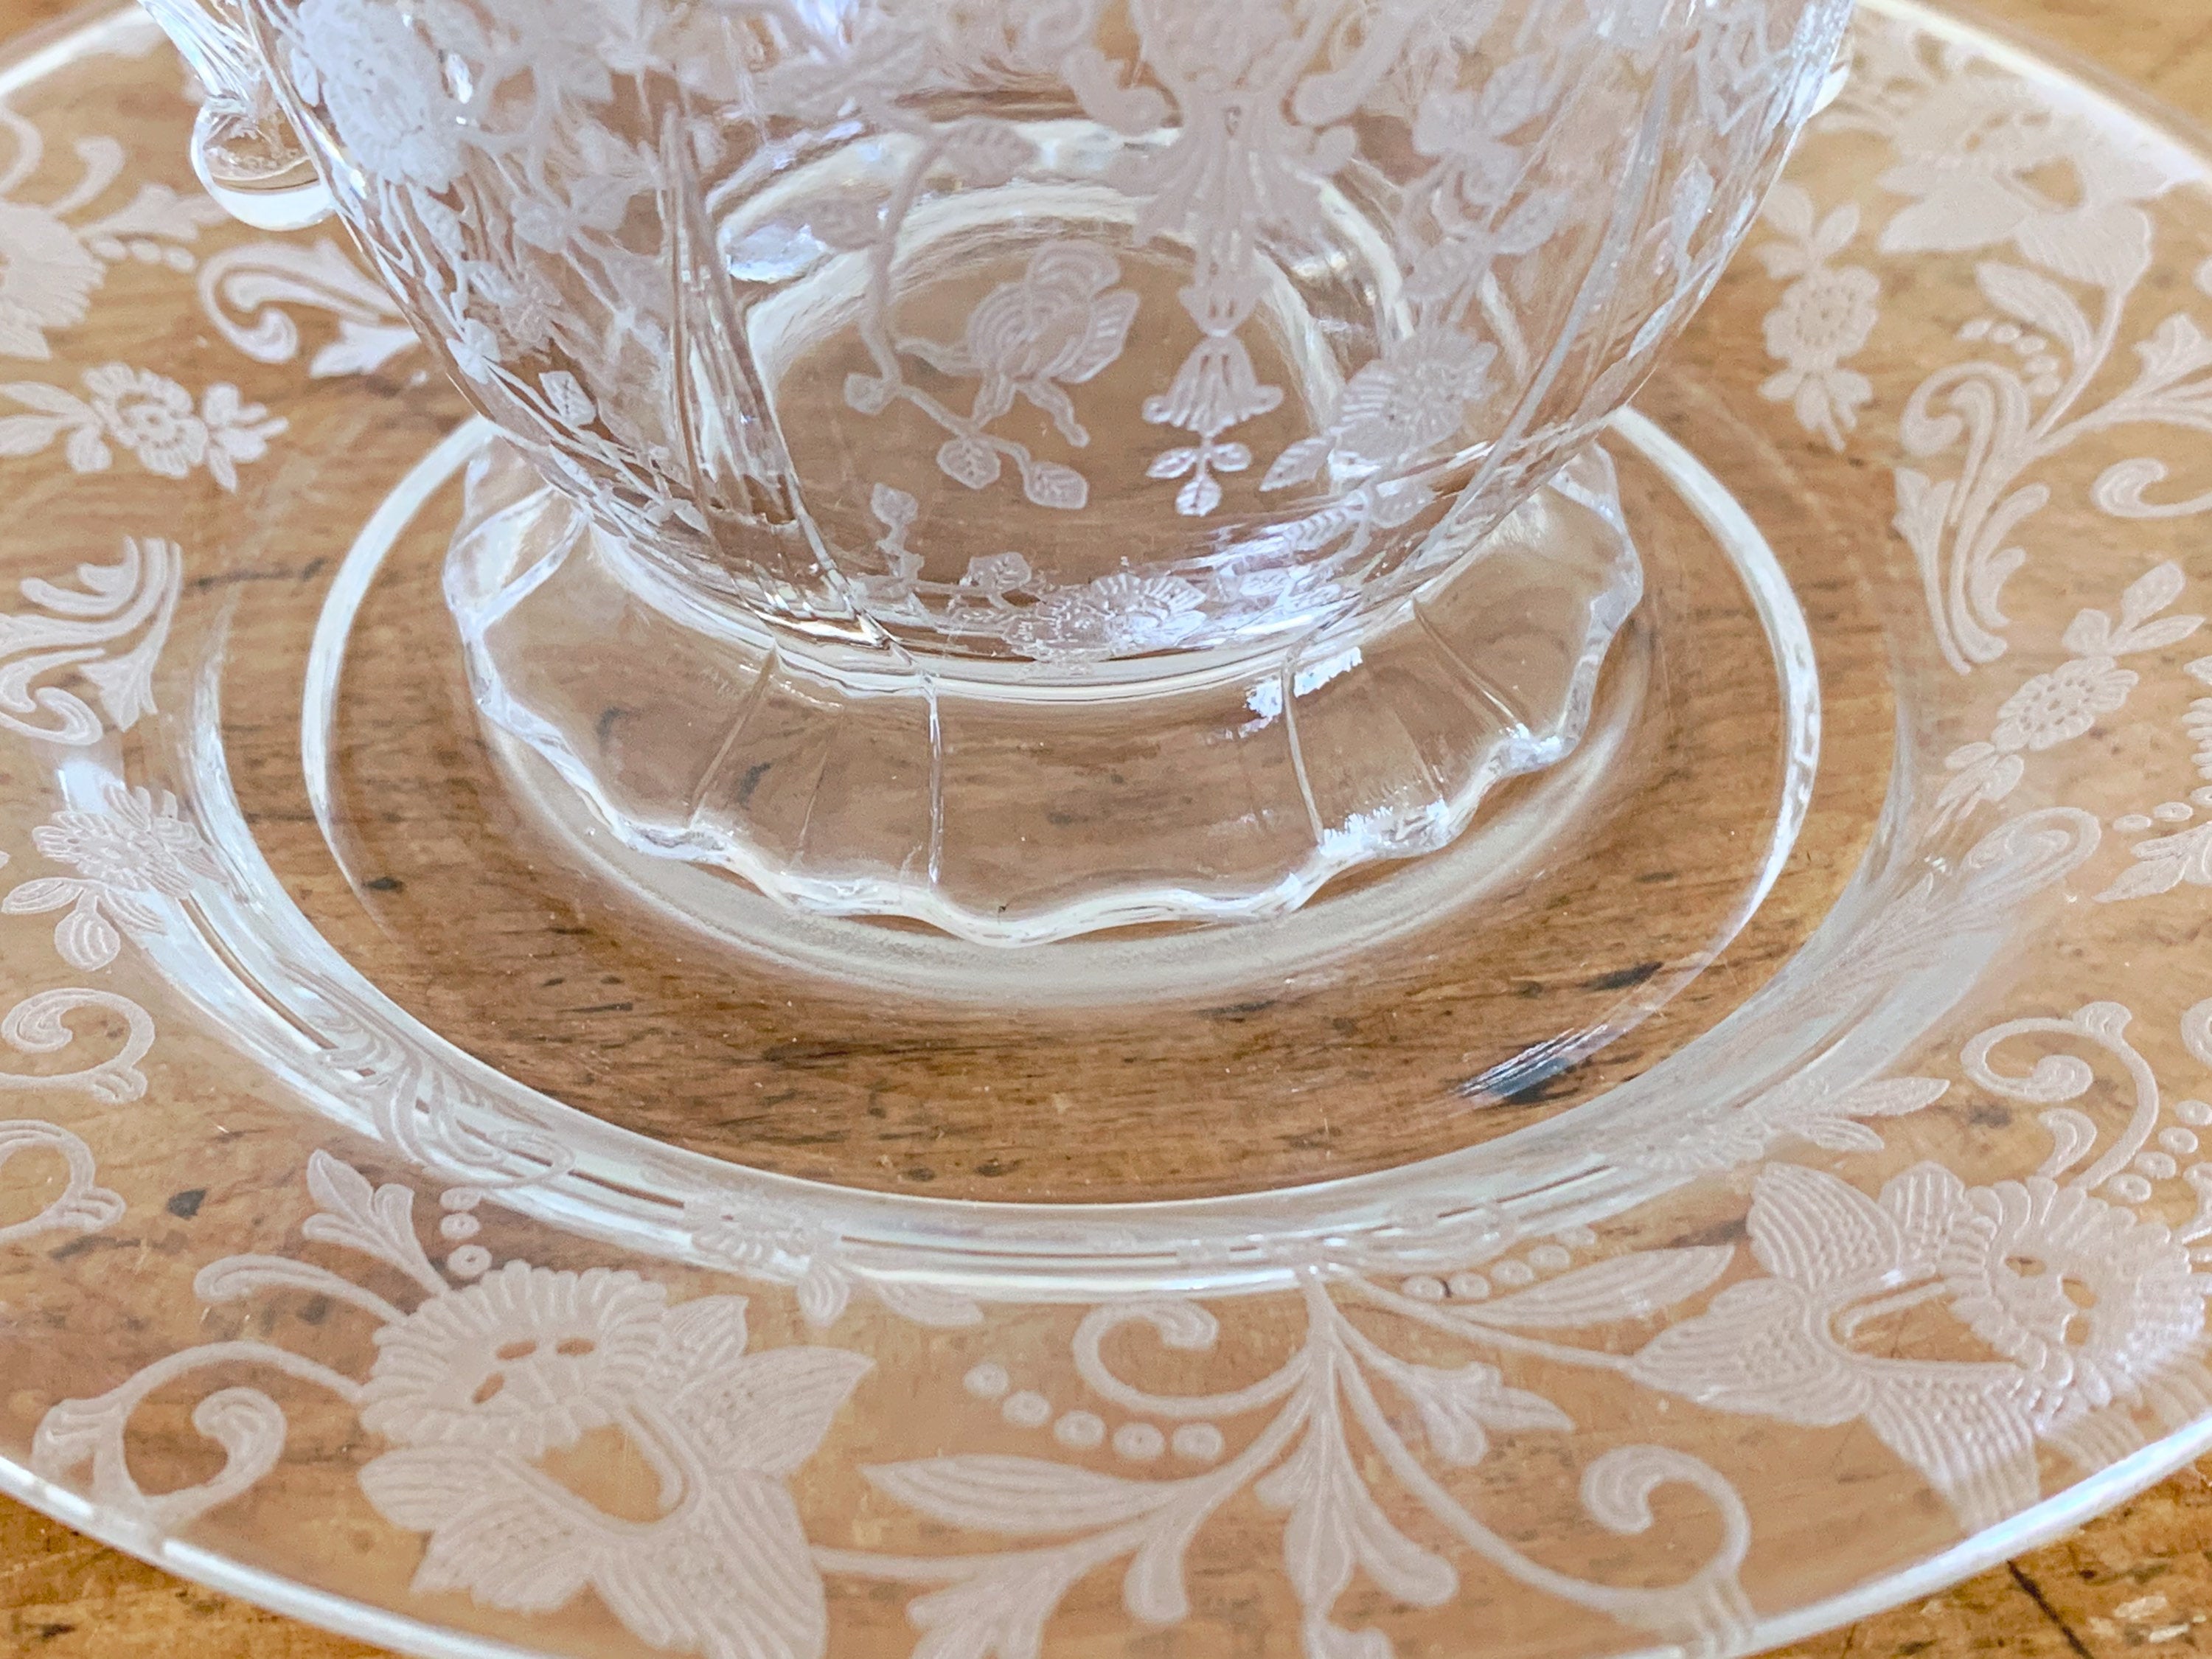 Vintage 1940s Cambridge Glass Sugar Bowl Rose Point Etch Pattern and Saucer | Depression Glass Mix Match Tableware Afternoon Tea